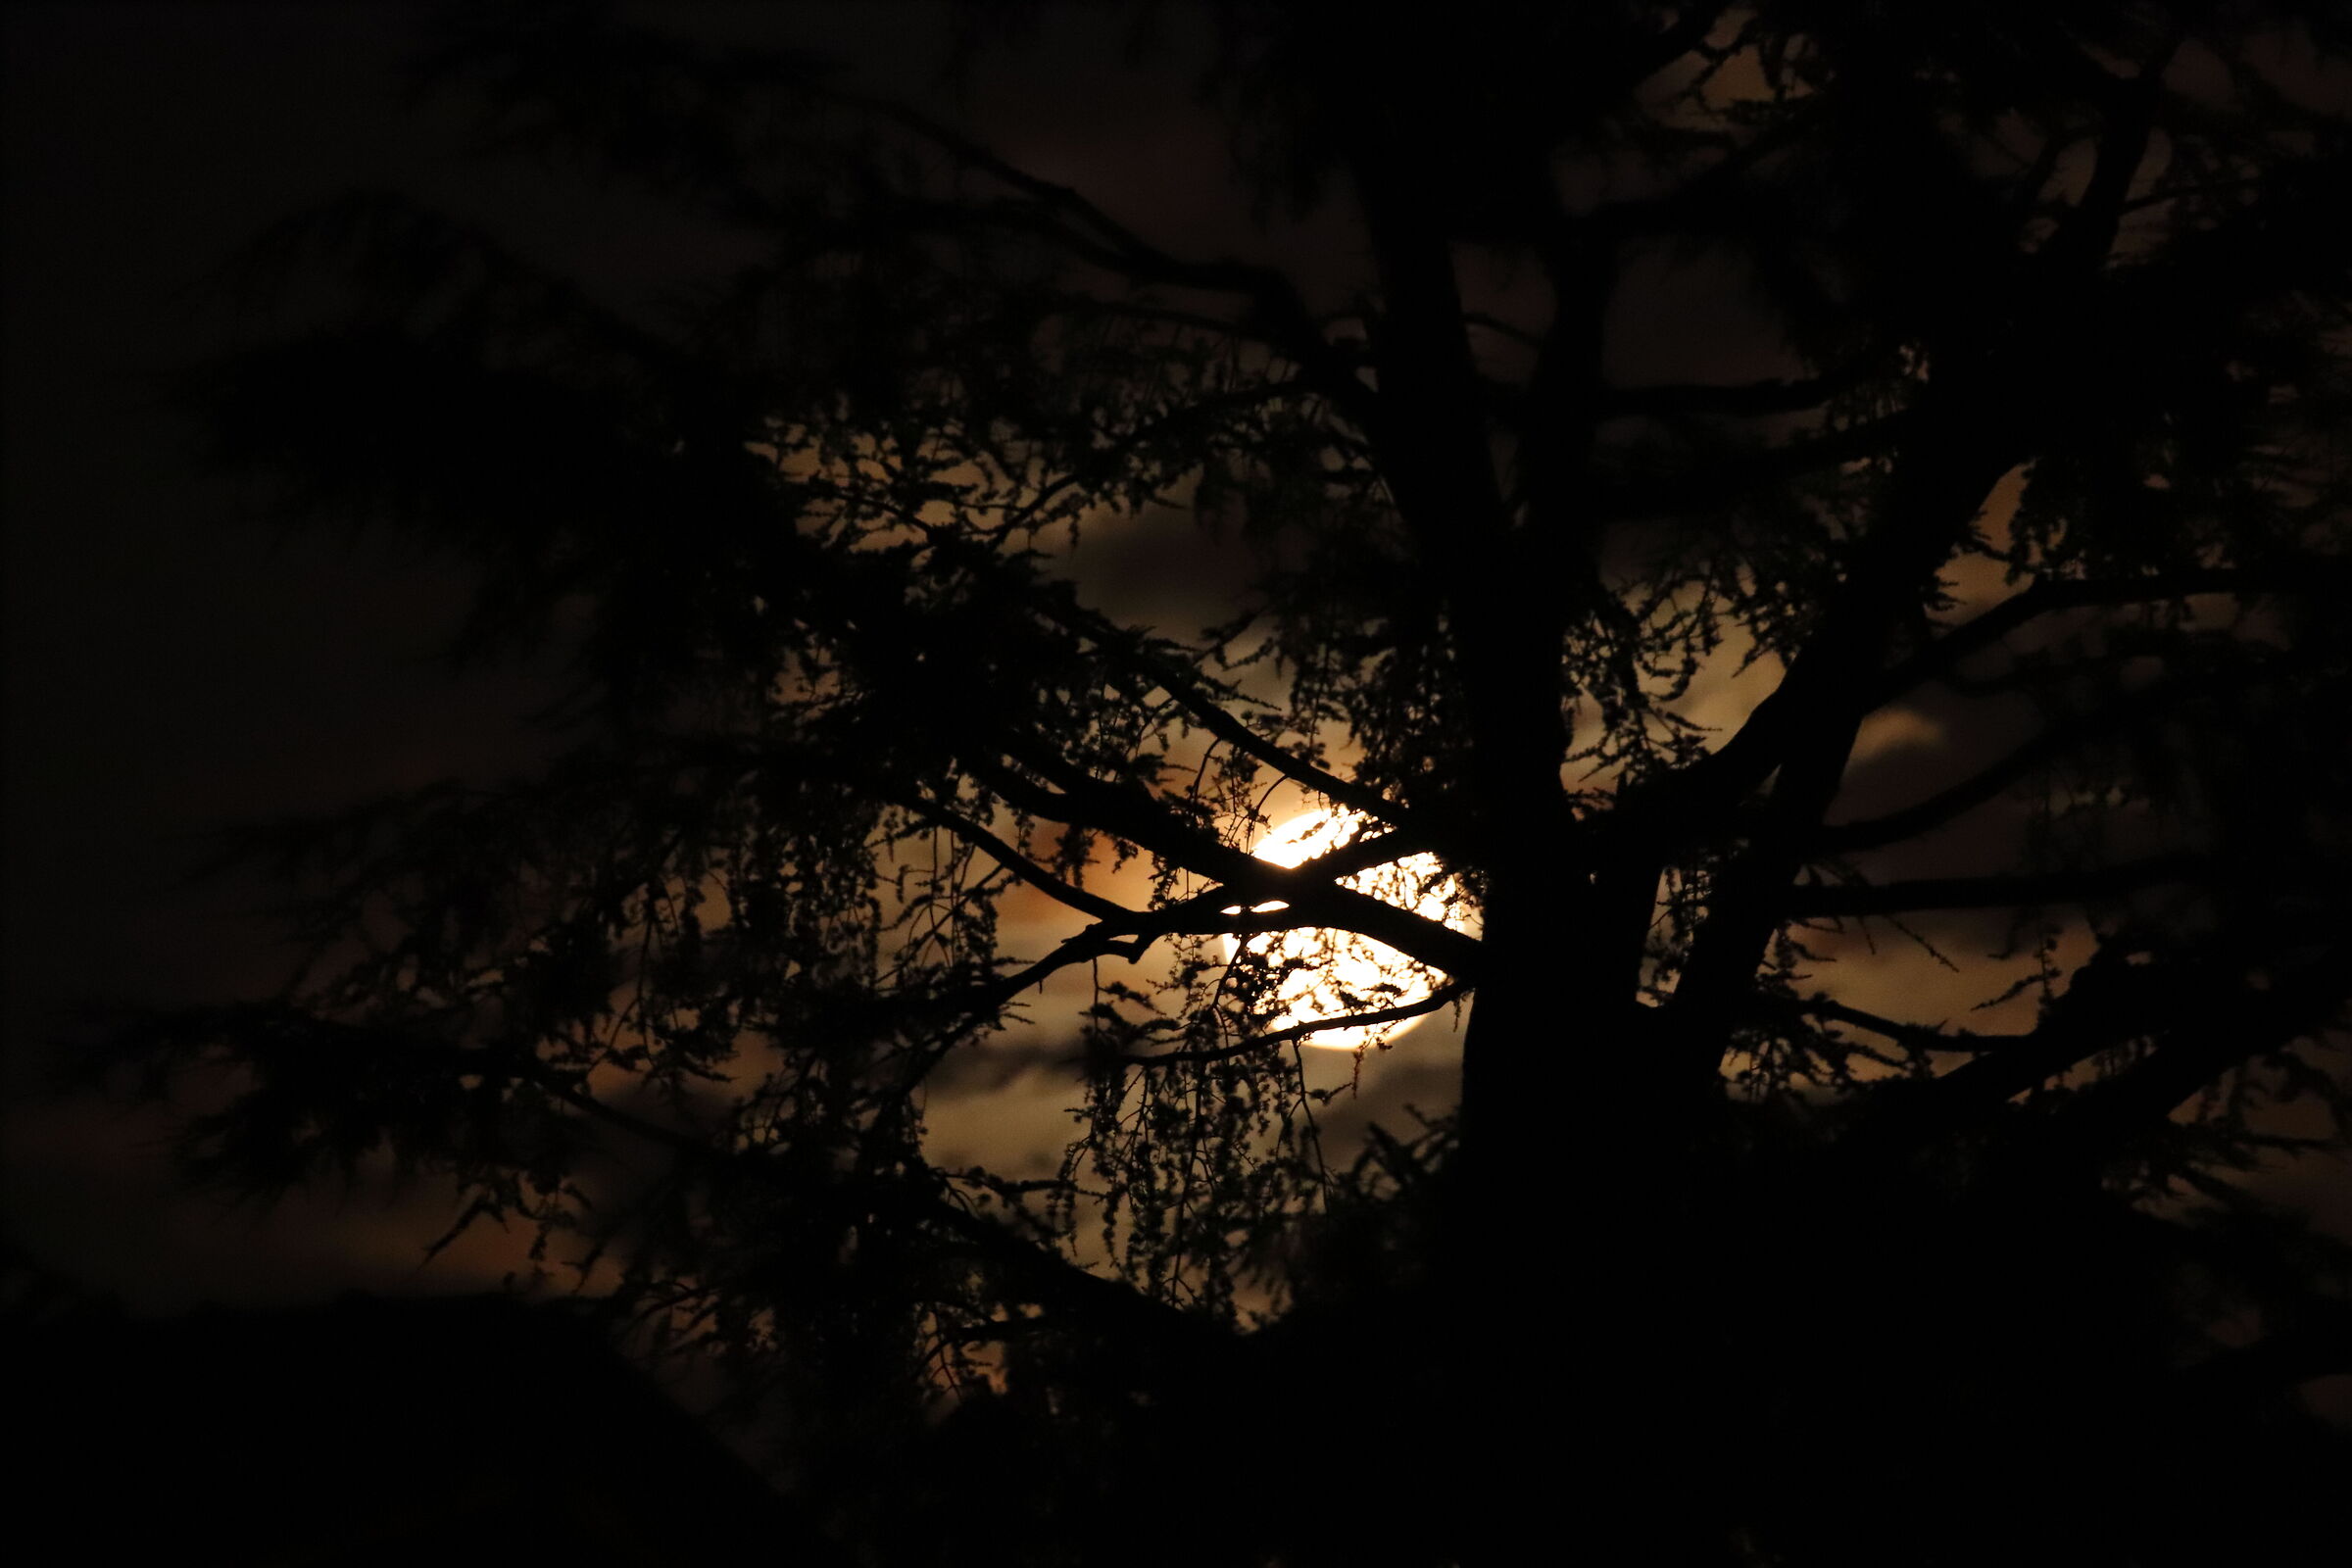 The moon hides behind the trees...